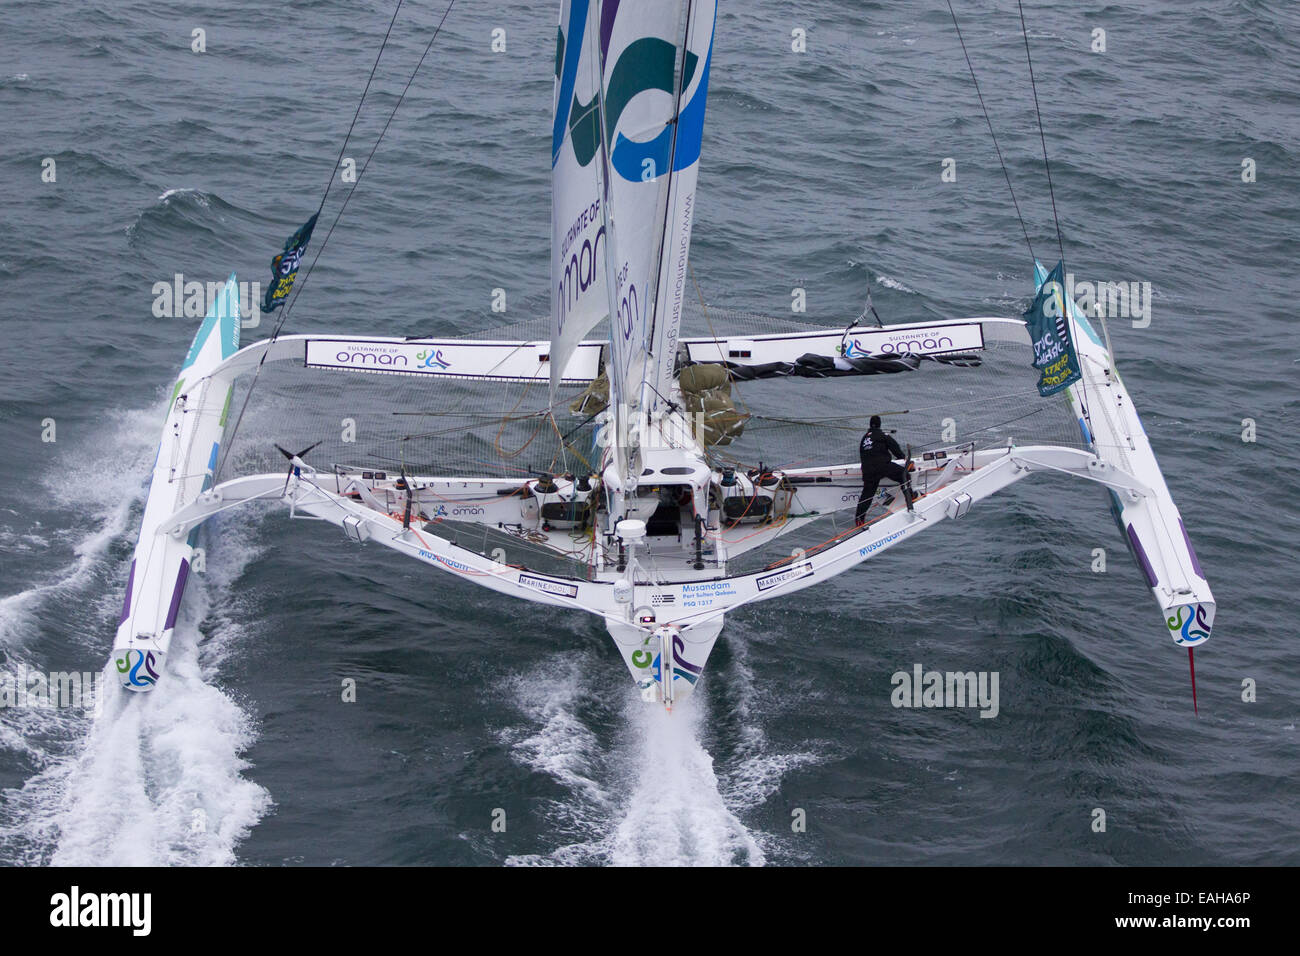 Saint Malo, Brittany, France. 26th Oct, 2014. Boats prepare for the cross  ocean racing. Sidney Gavignet (